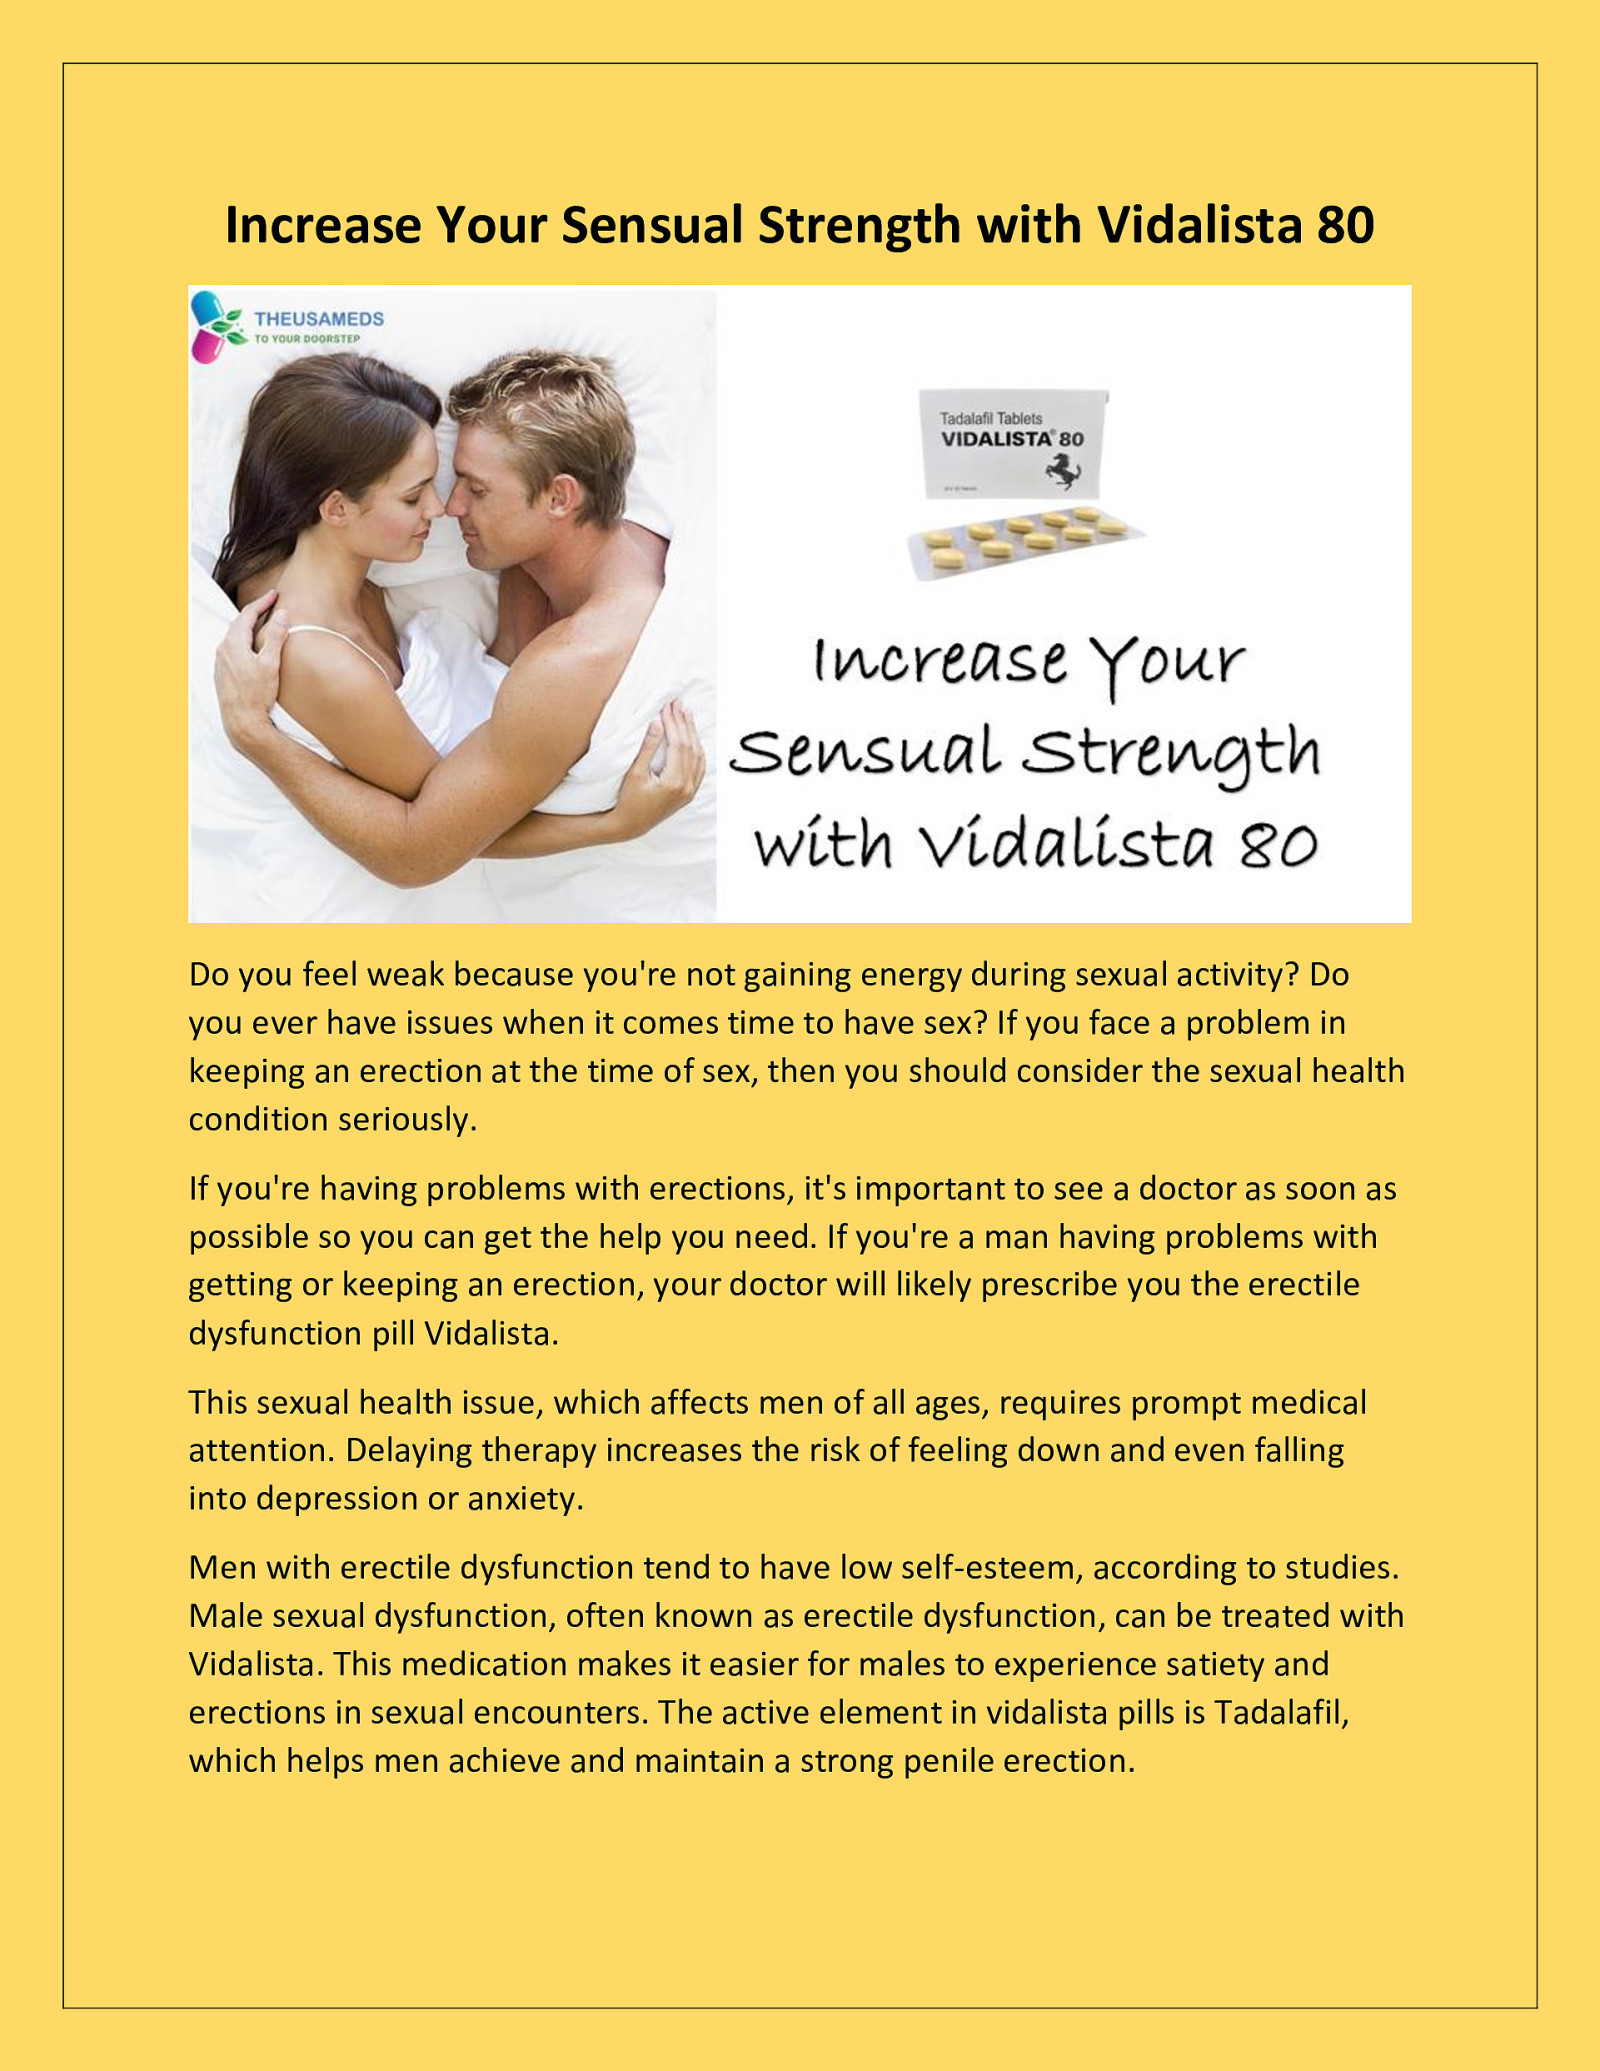 Increase Your Sensual Strength with Vidalista 80 by James Walker